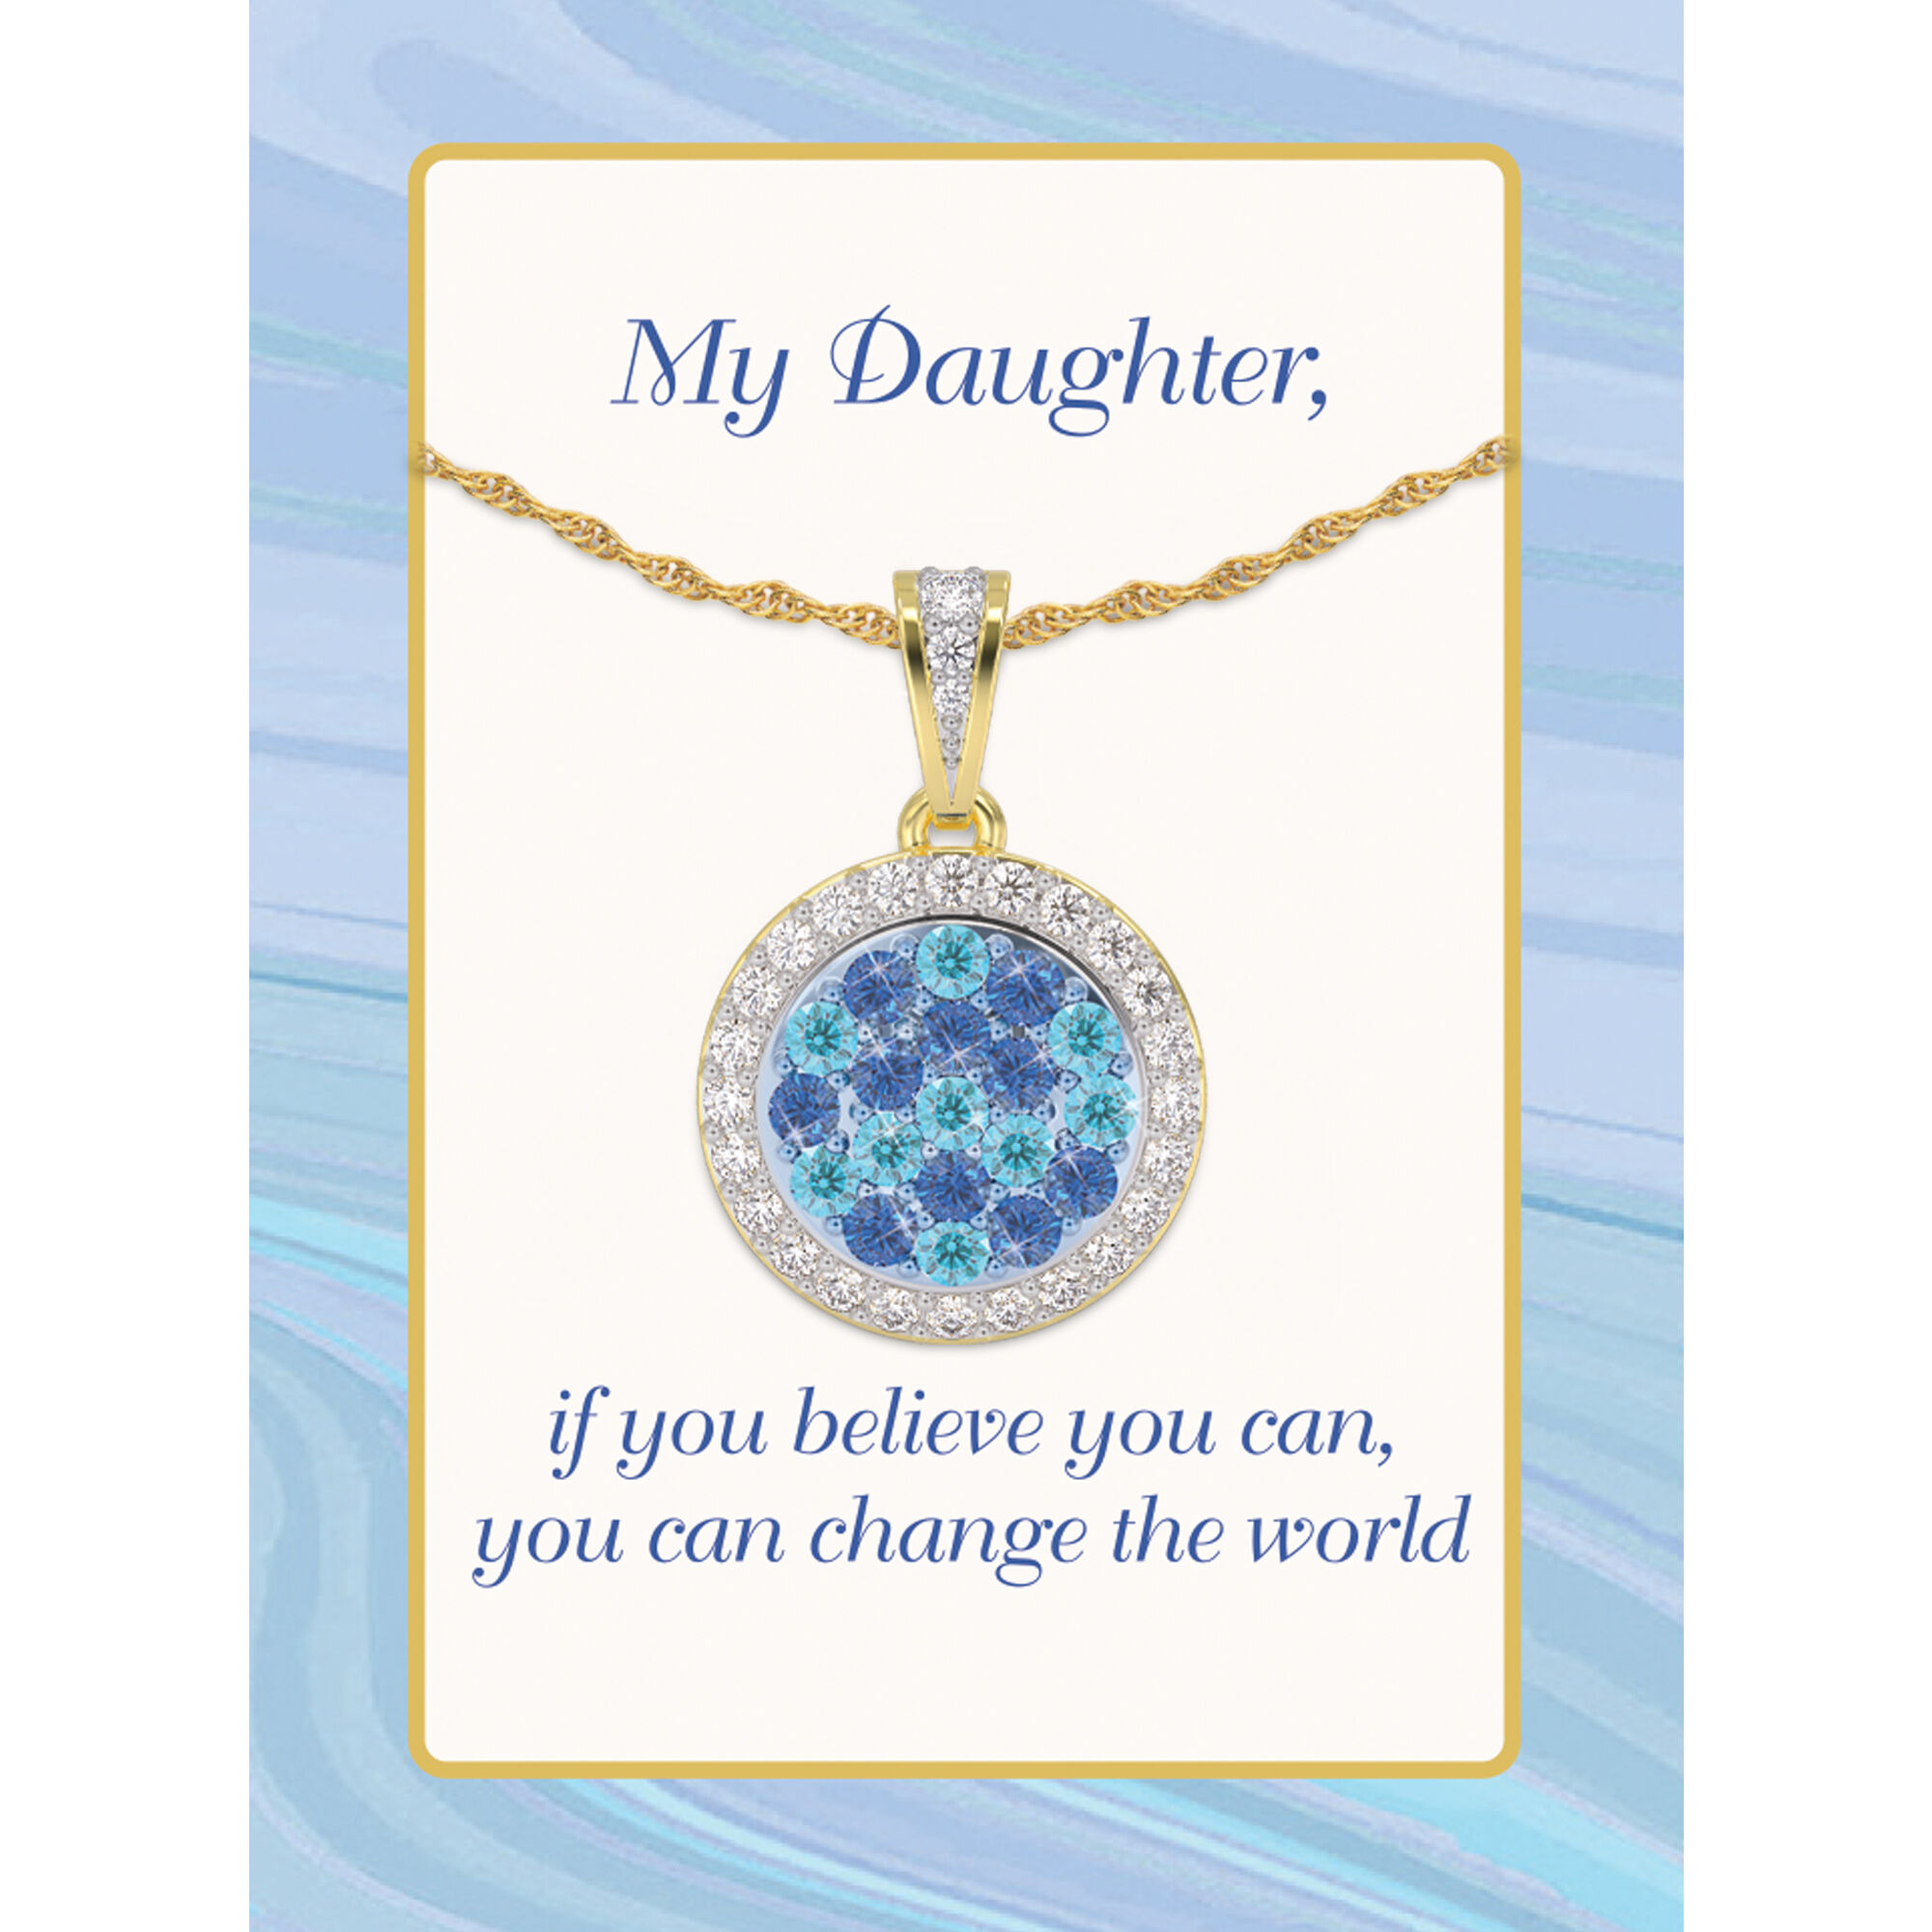 You Can Change the World Daughter Mosaic Pendant 10219 0014 d poem